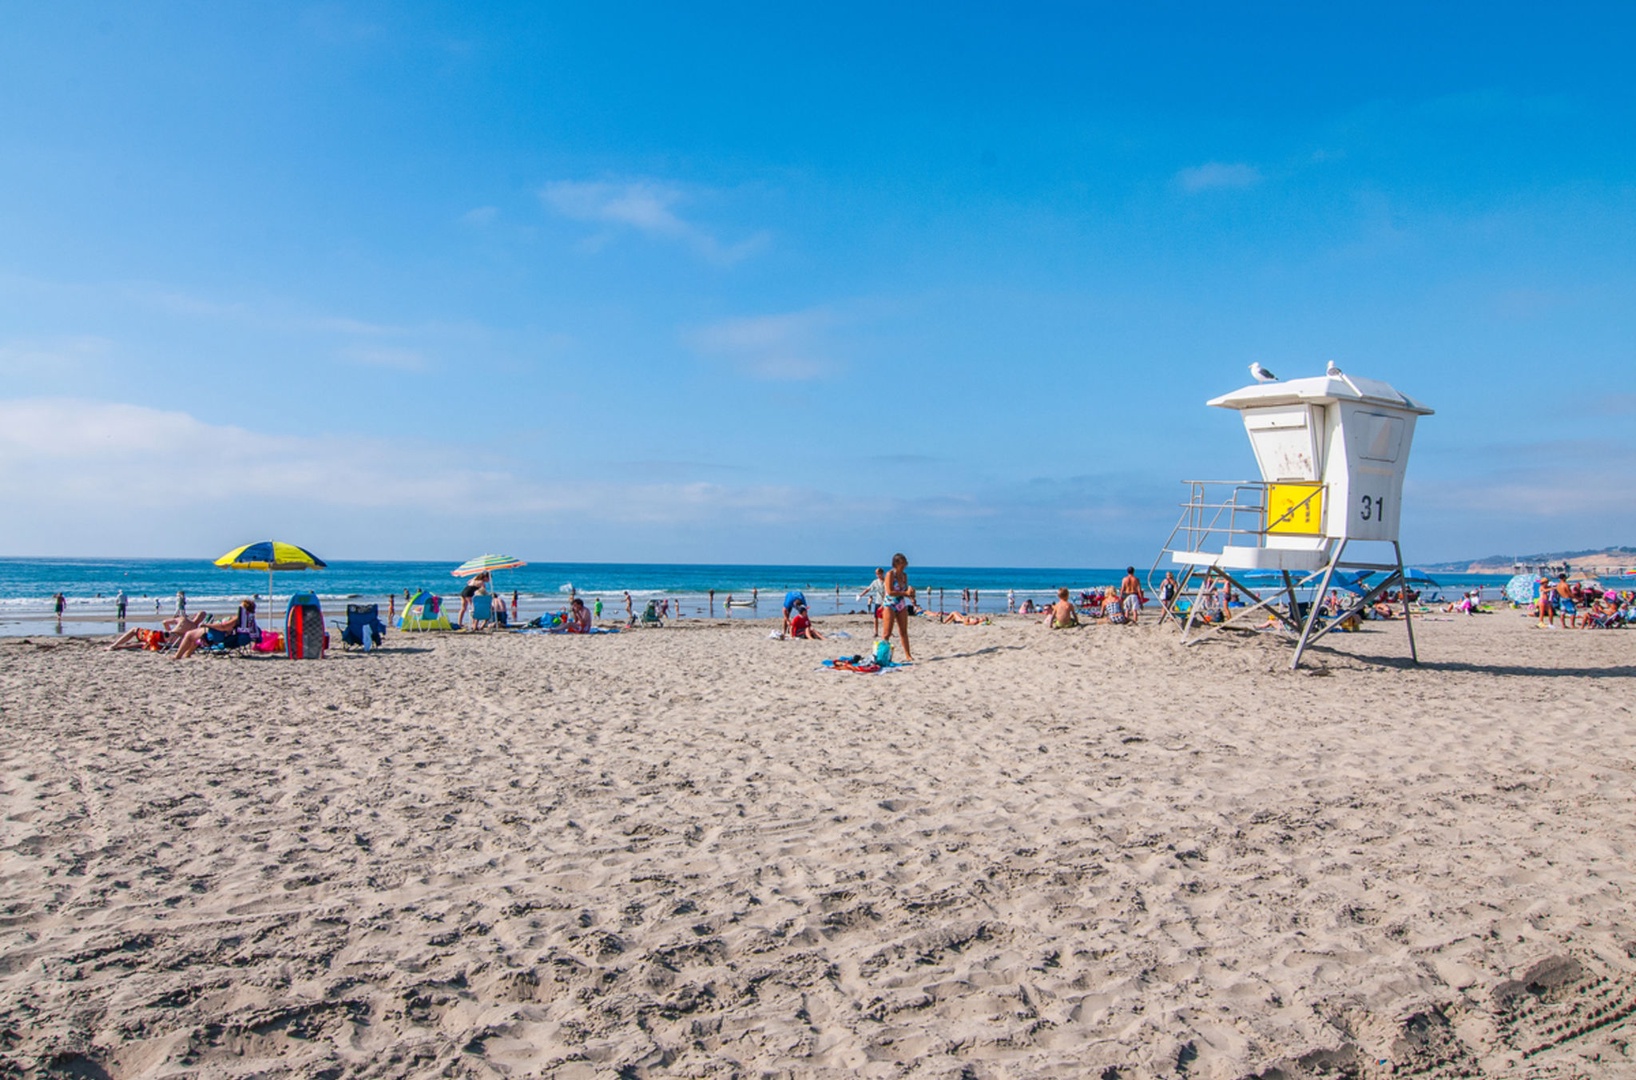 La Jolla Shores - voted one of the best!